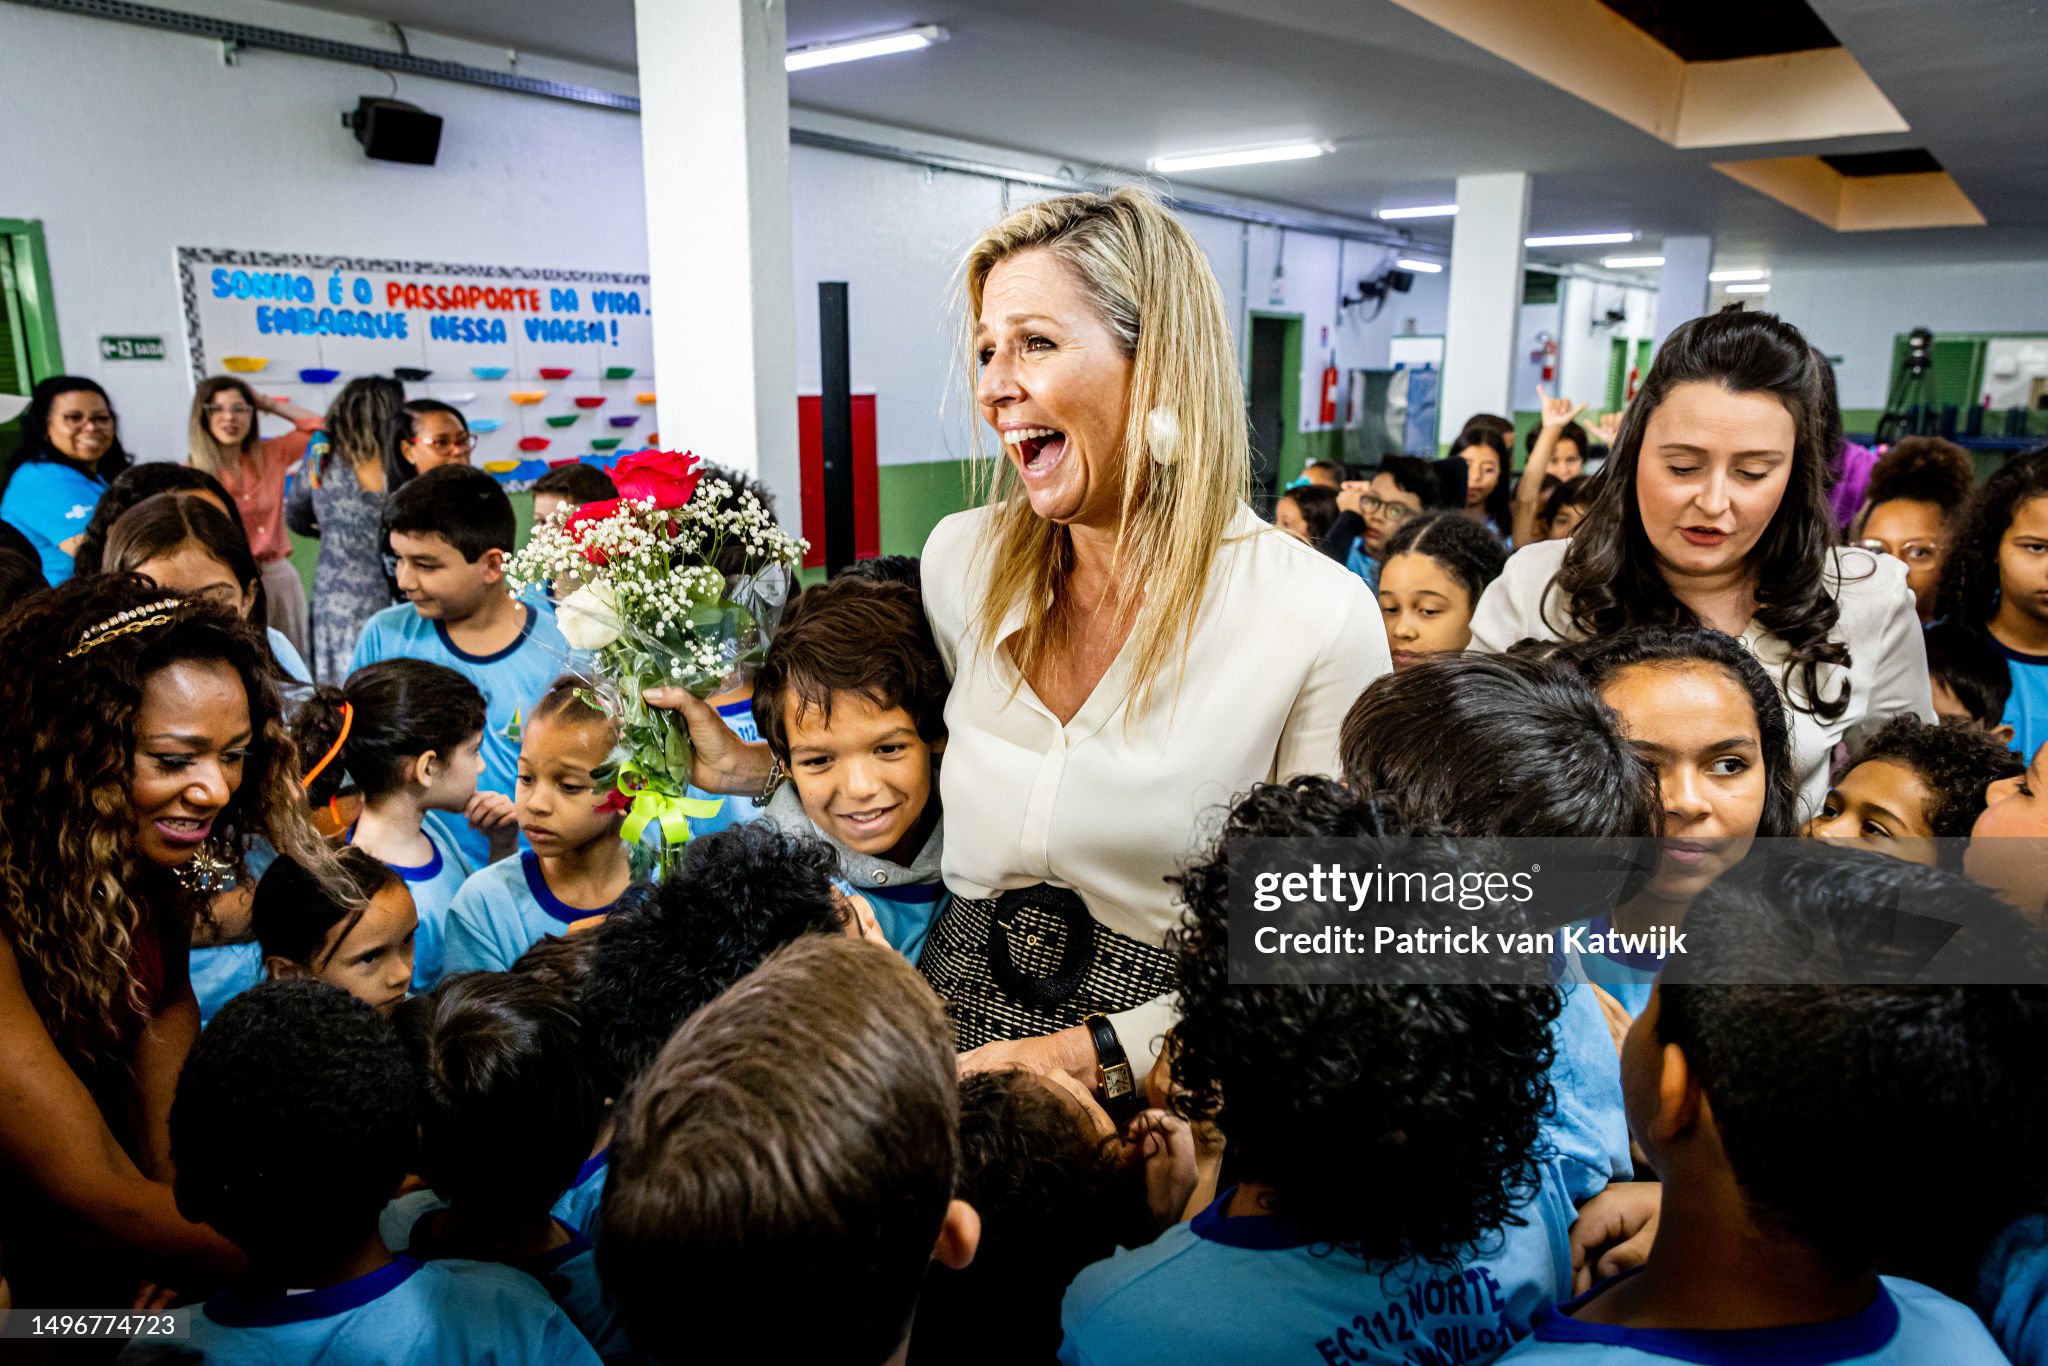 CASA REAL HOLANDESA - Página 93 Queen-maxima-of-the-netherlands-visits-321-norte-school-for-a-financial-education-lesson-on